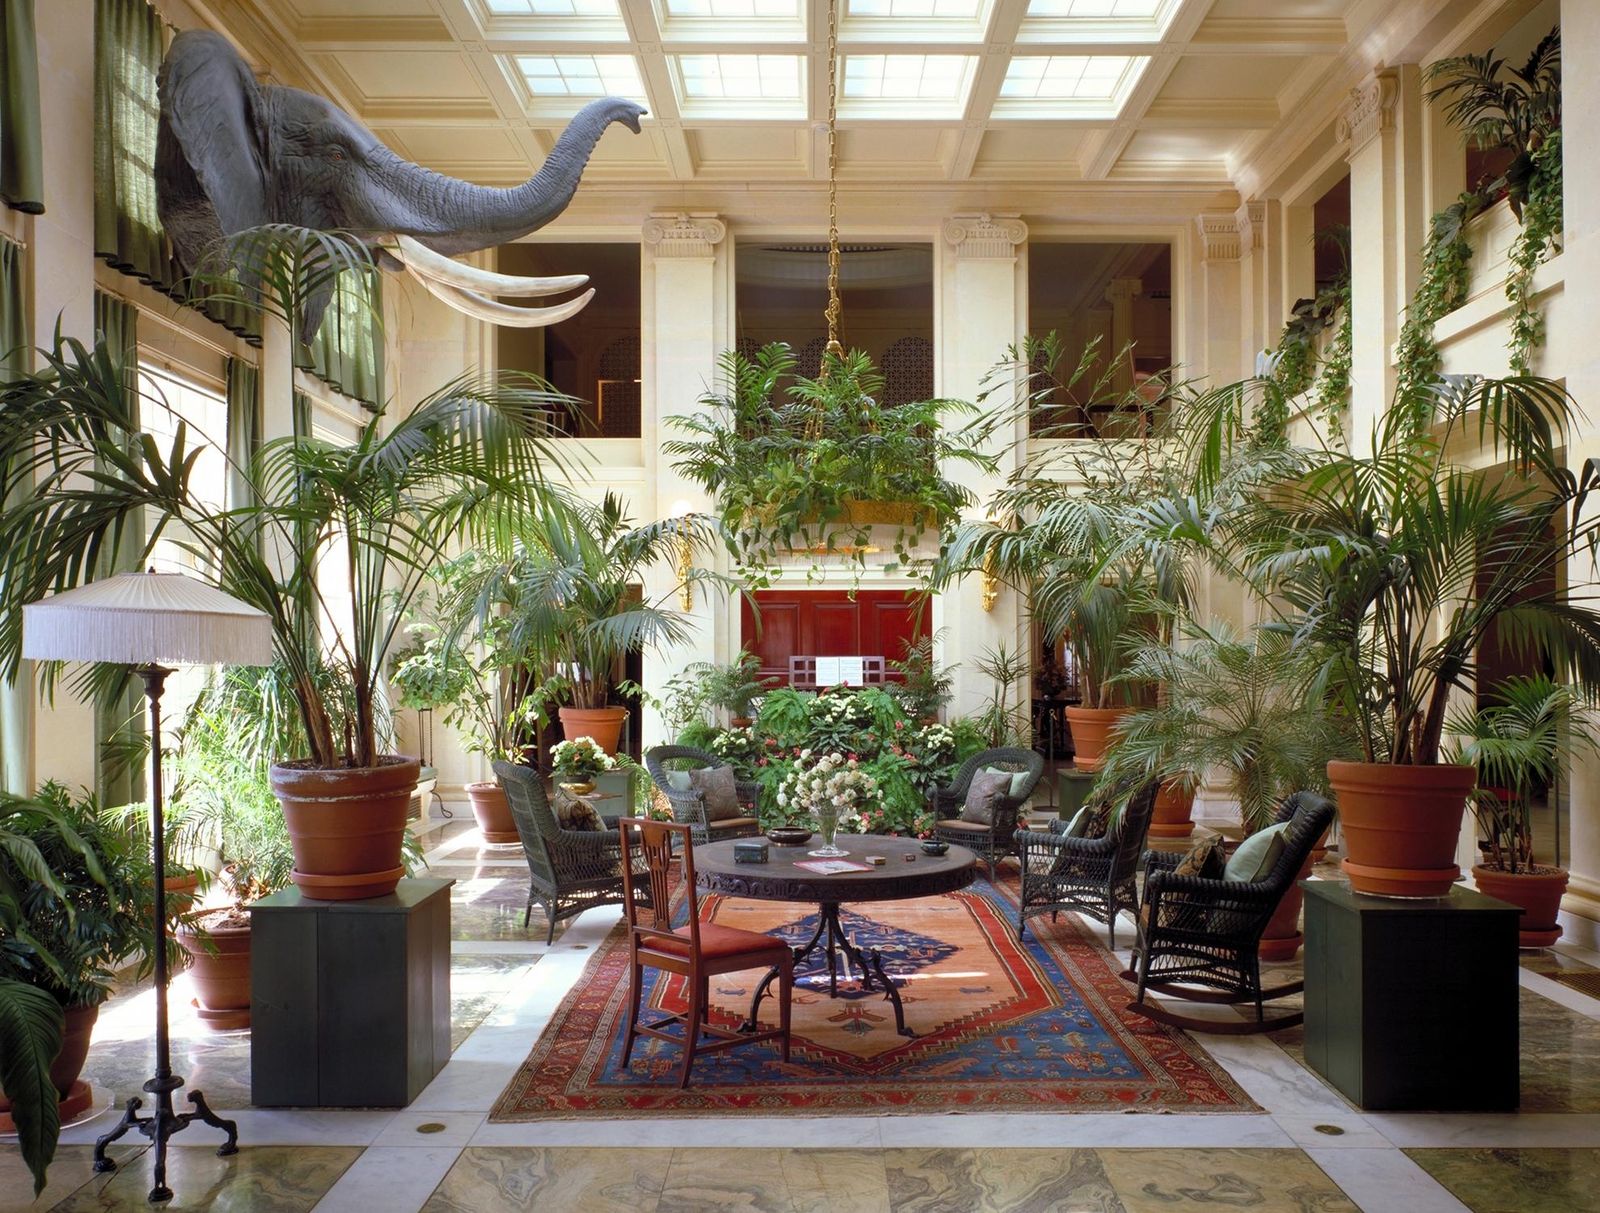 Visit the Homes of America's Greatest Inventors, Travel